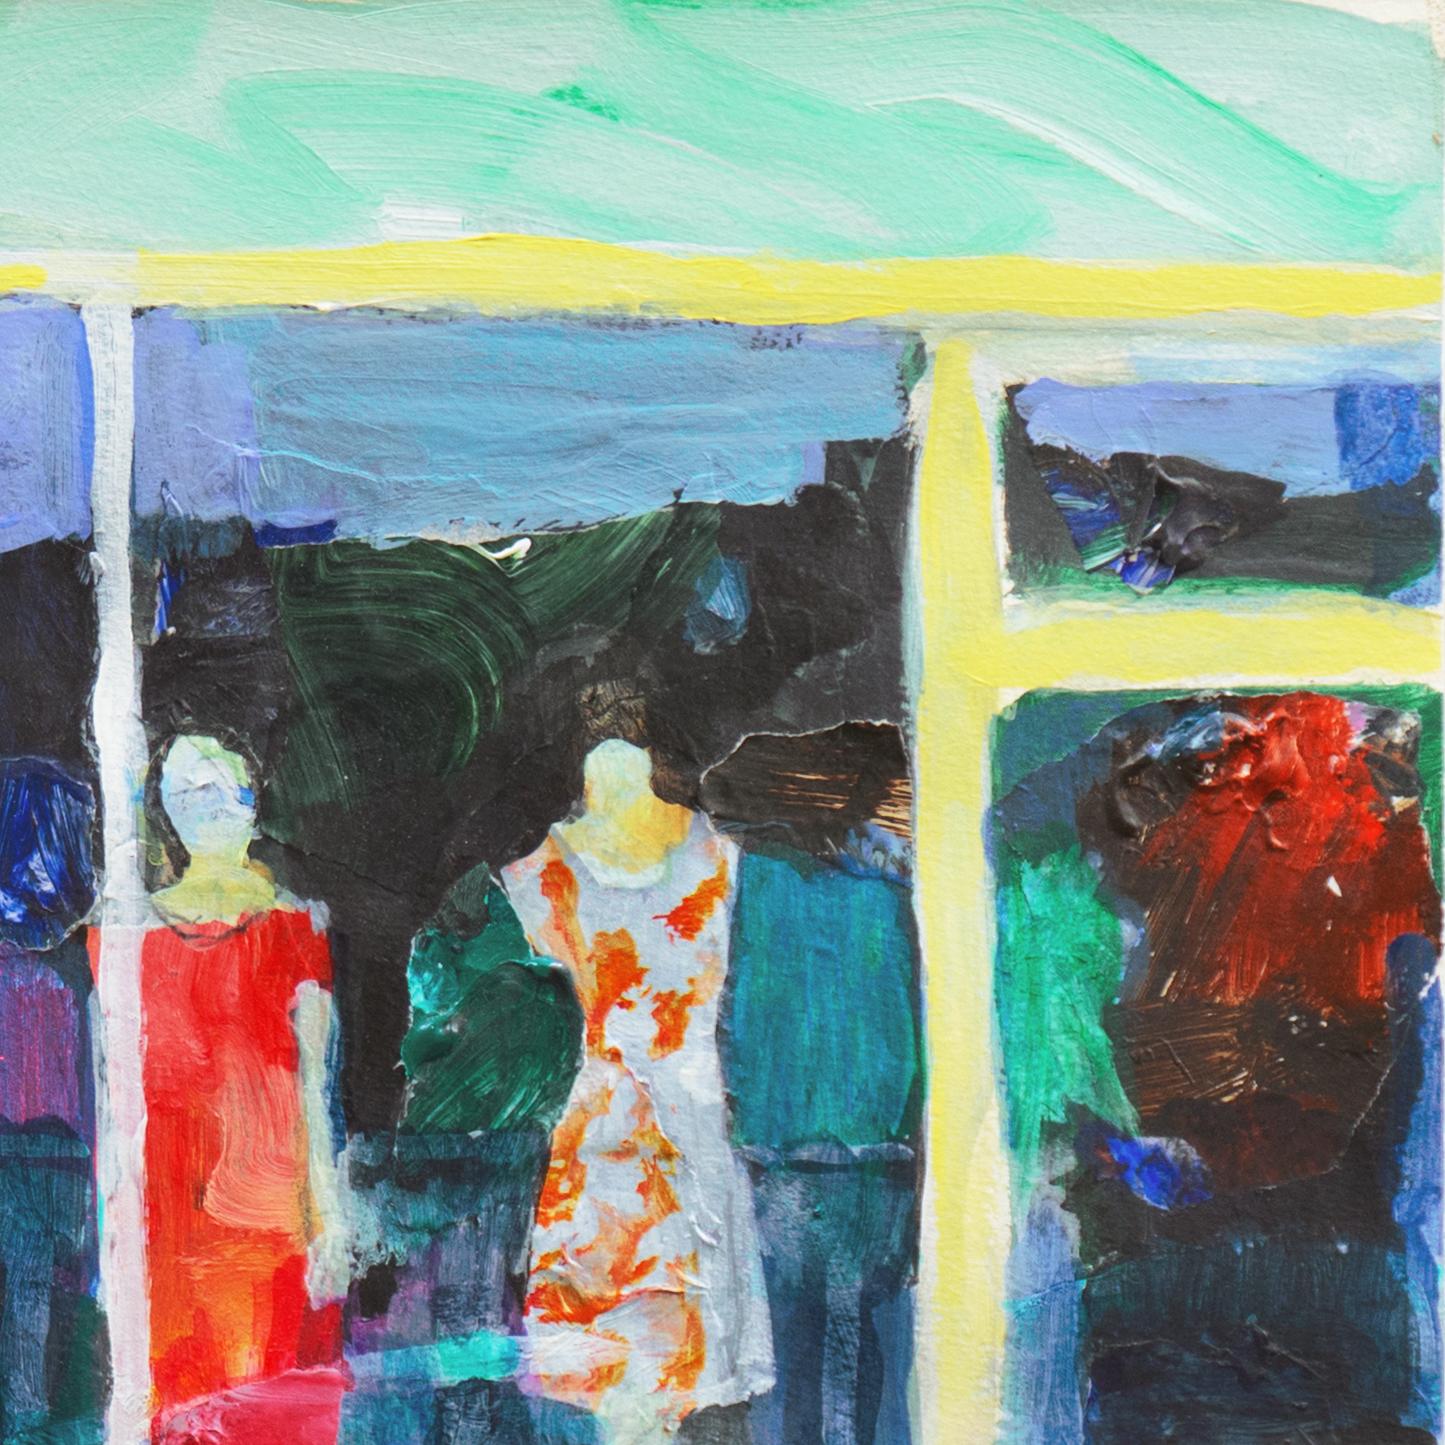 'Mannequins in a Store Window', Bay Area Figurative, Student of Wayne Thiebaud - Blue Figurative Painting by Bud Gordon